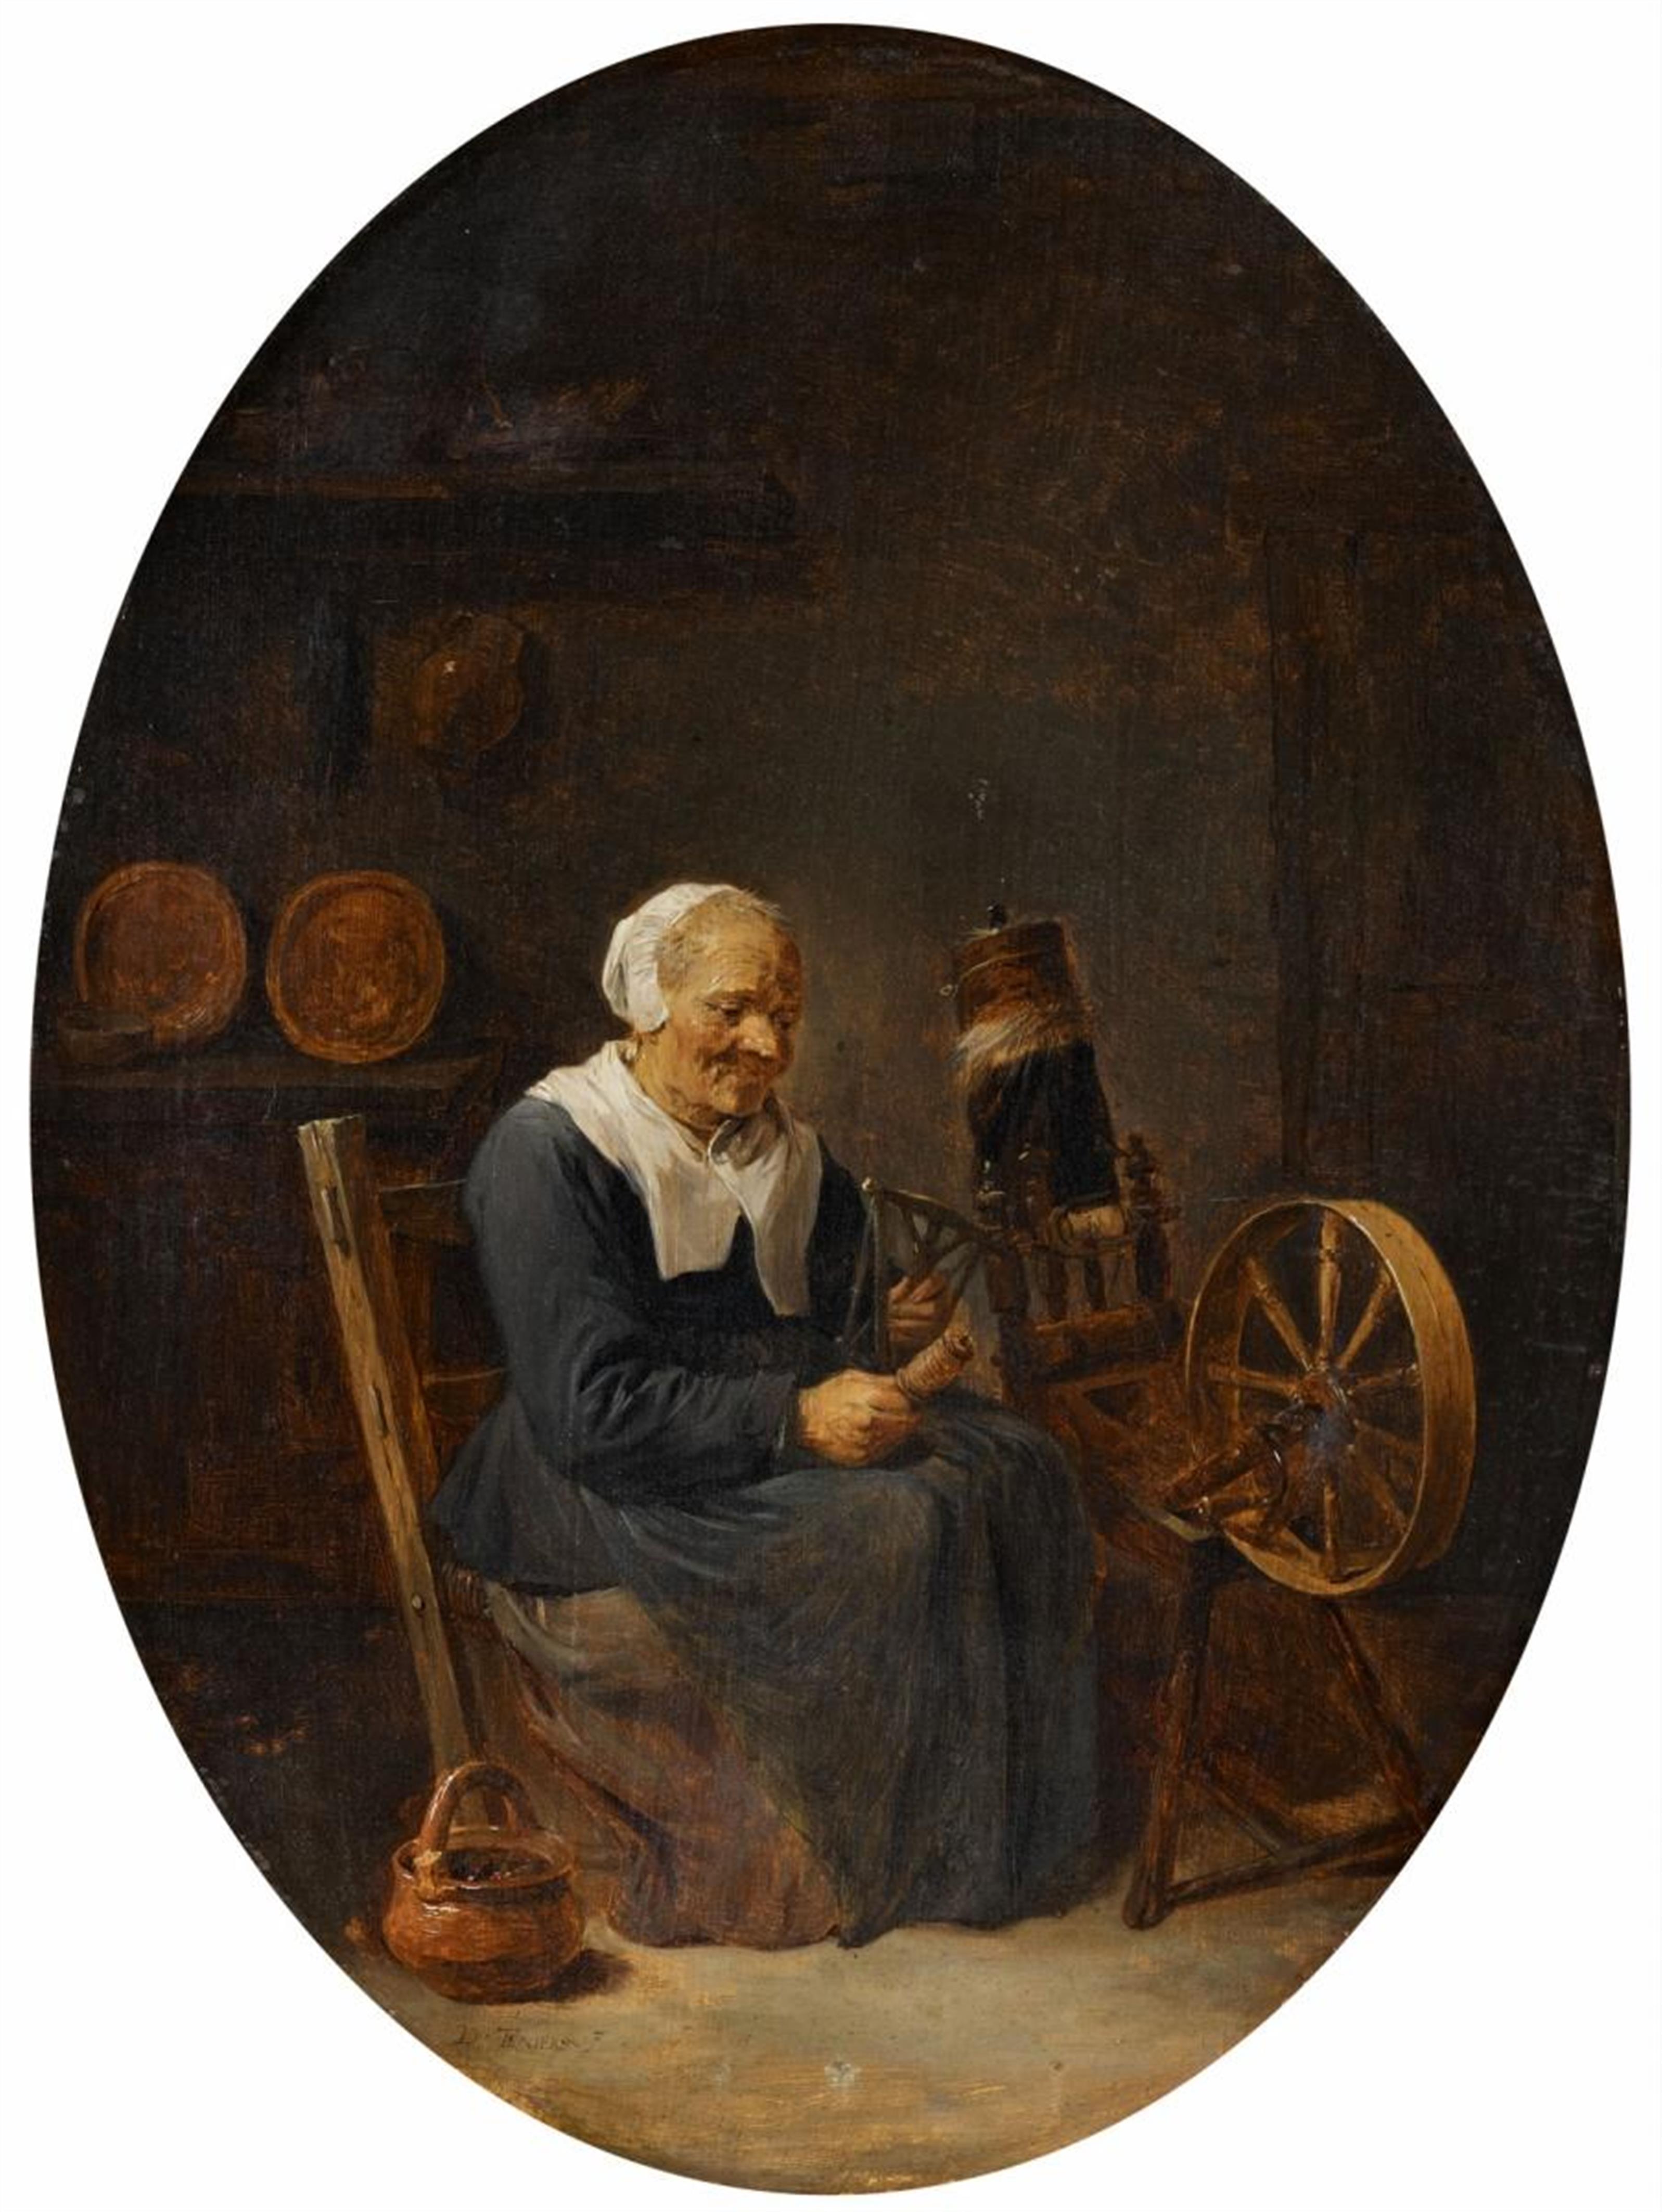 David Teniers the Younger - OLD WOMAN AT THE SPINNING WHEEL - image-1